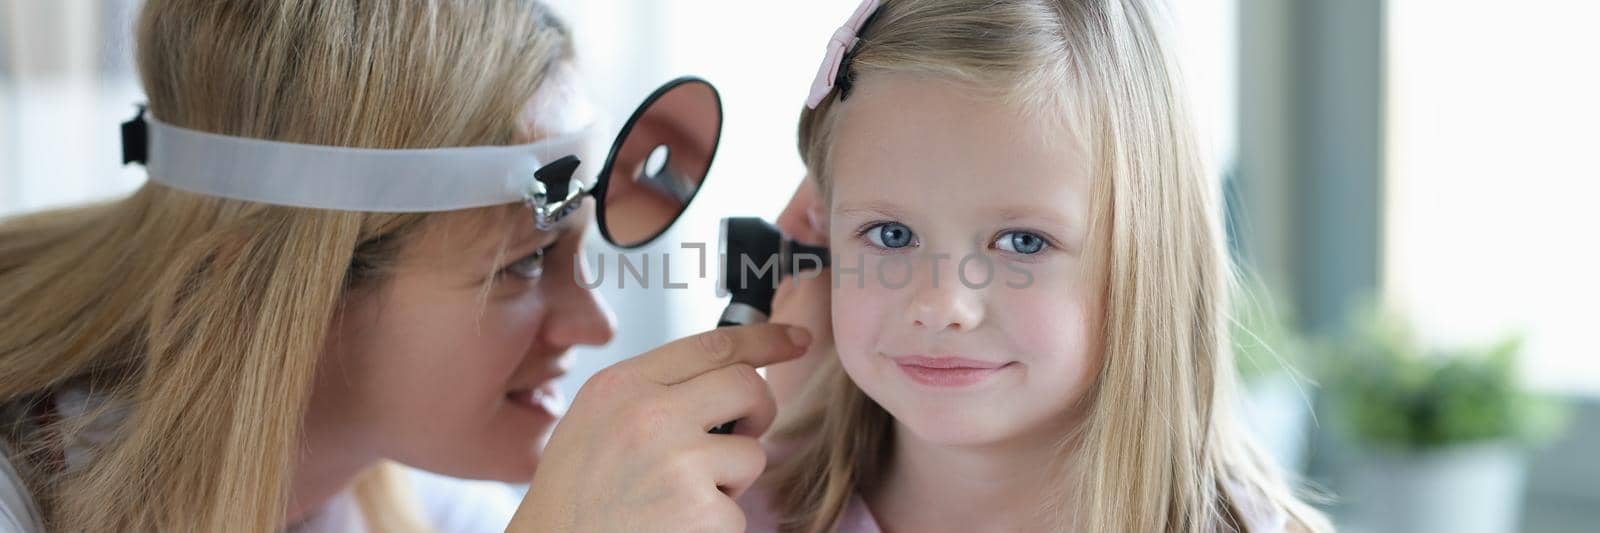 ENT doctor looks at little girl's ears with otoscope. Hearing test in children concept